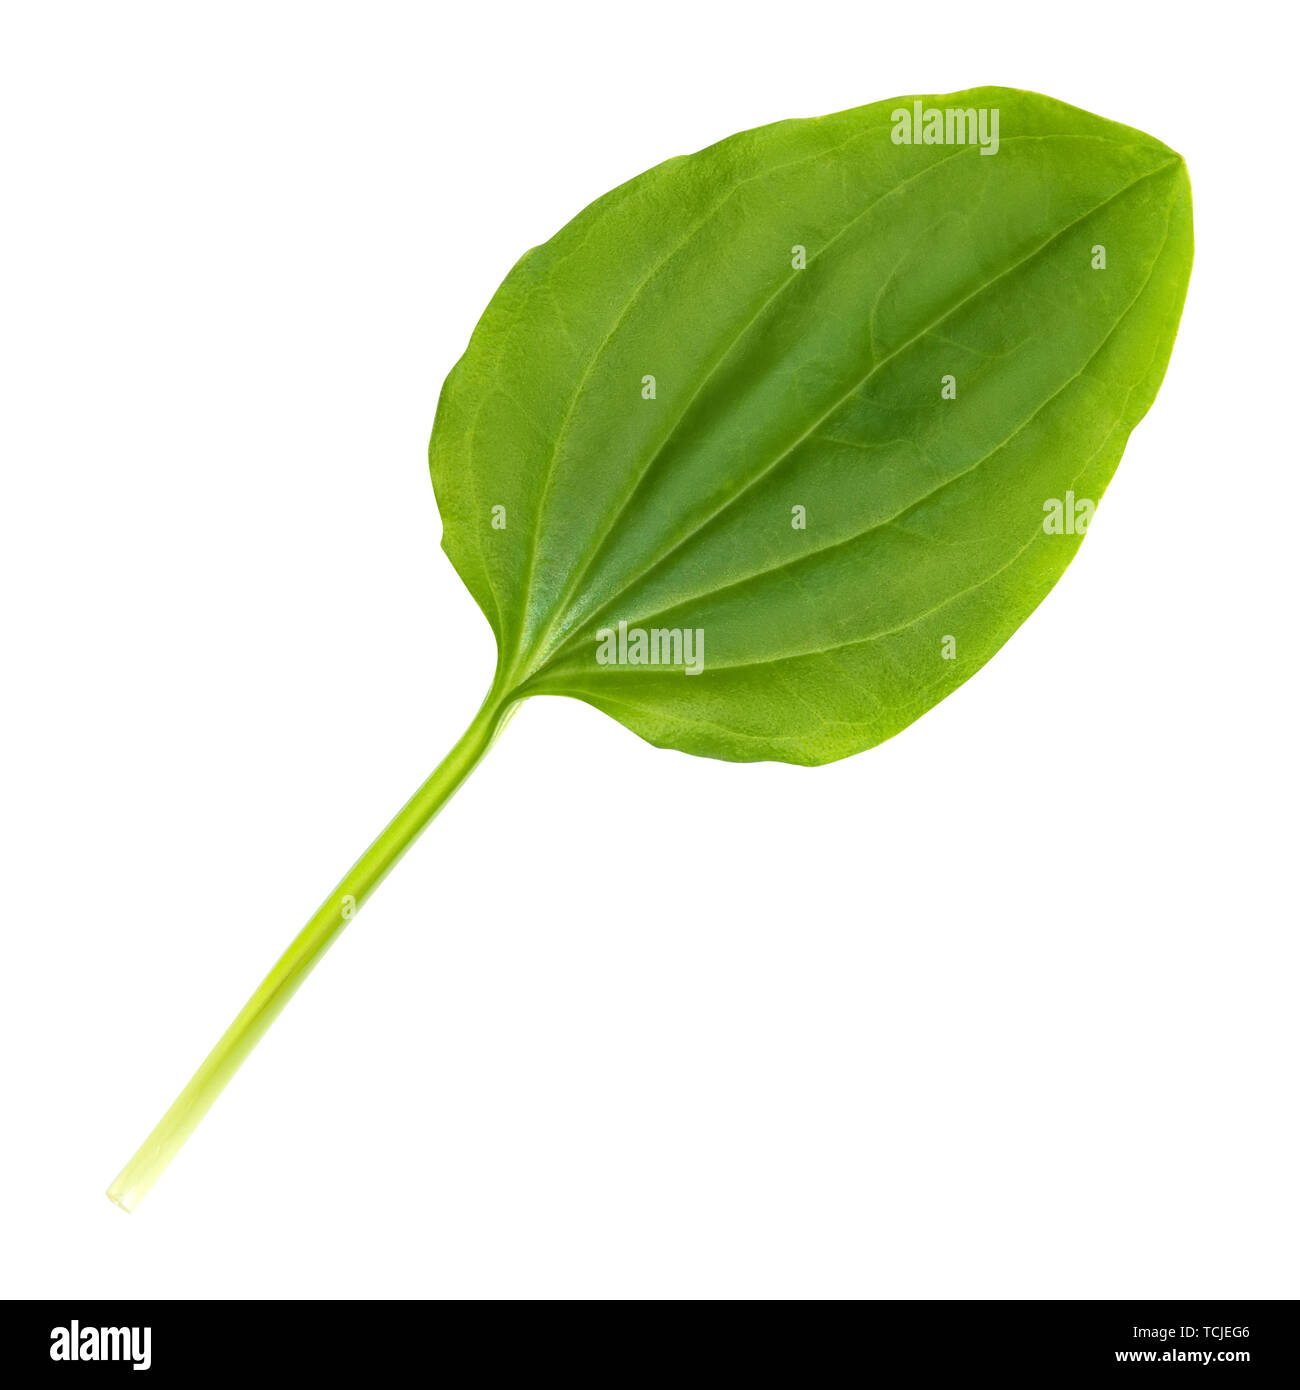 Plantain leaf is isolated on a white background. Stock Photo